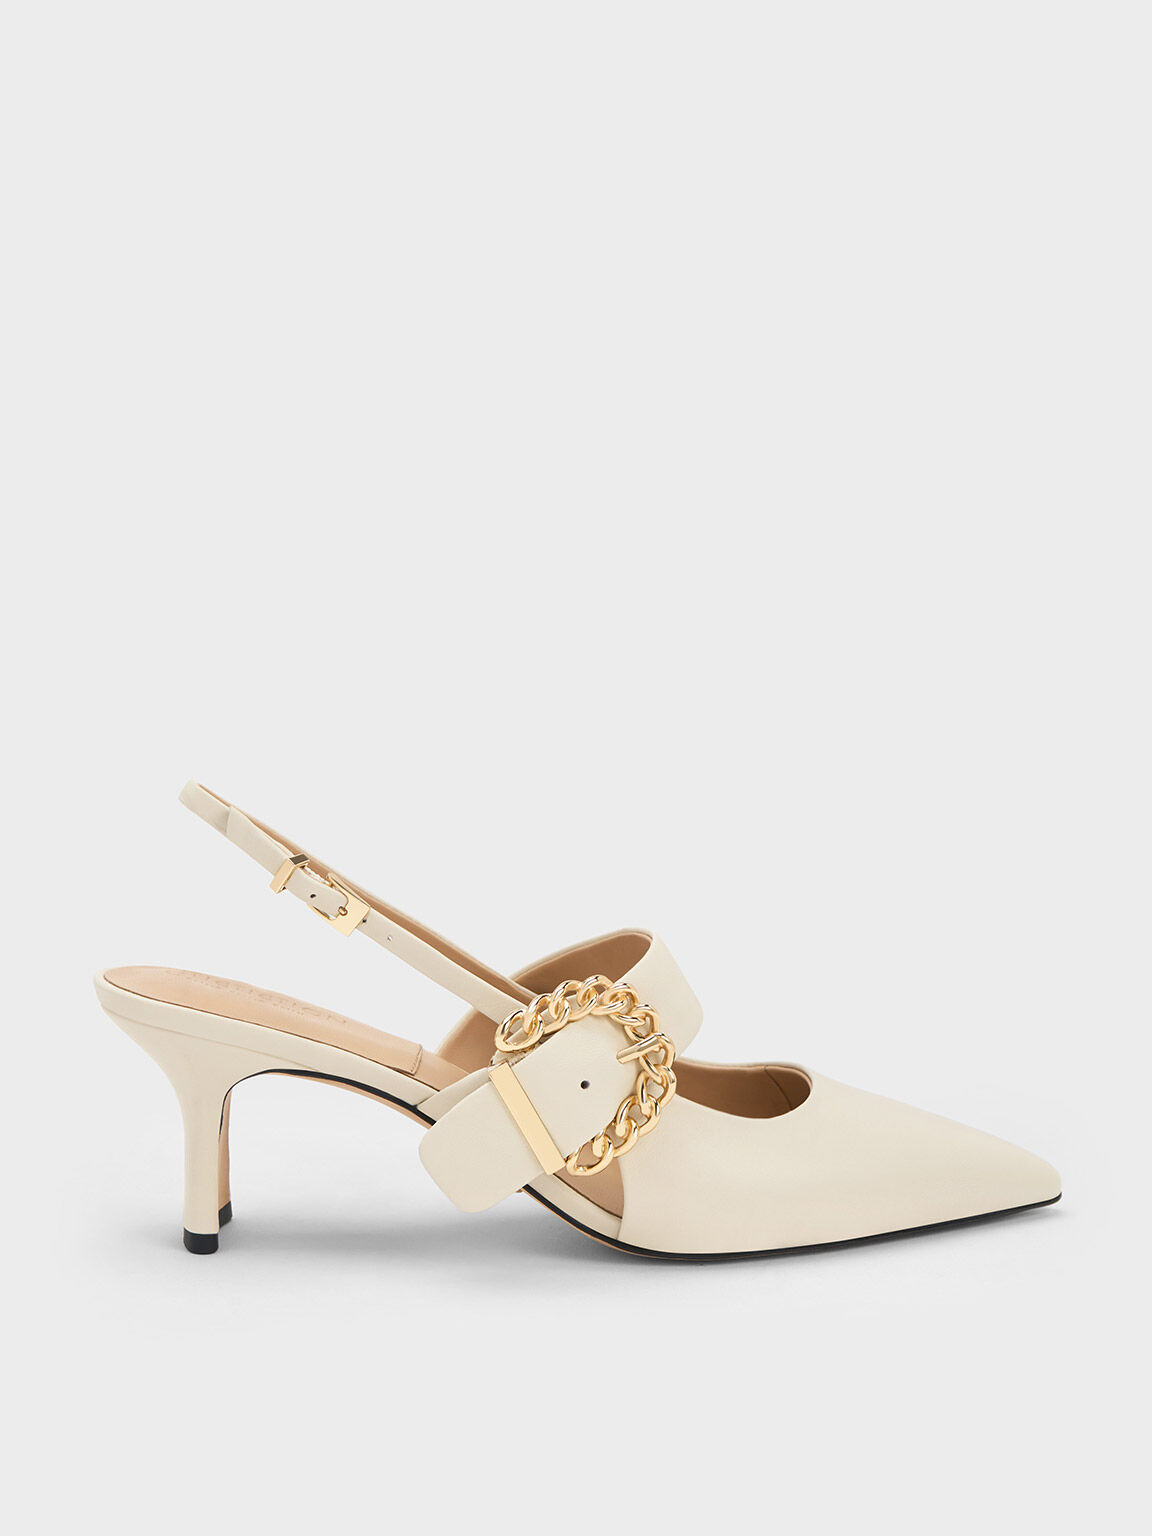 Chain-Buckled Leather Slingback Pumps, Chalk, hi-res